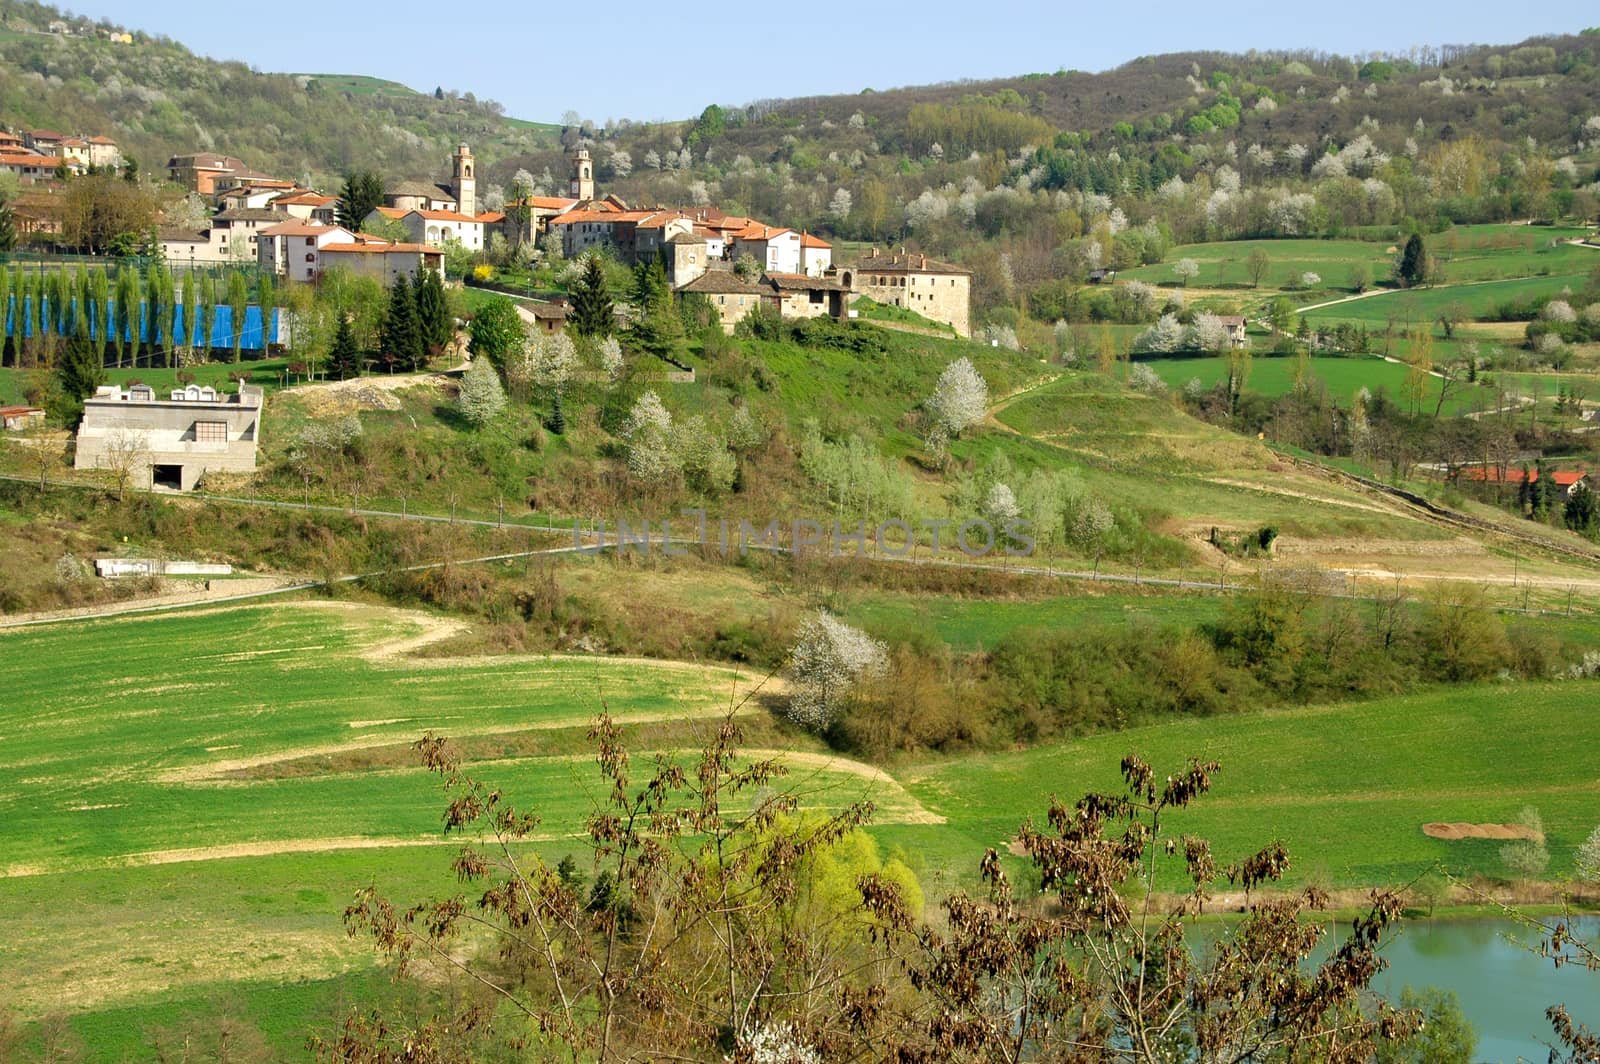 This photo represents a typical Langhe landscape with a village in the background.